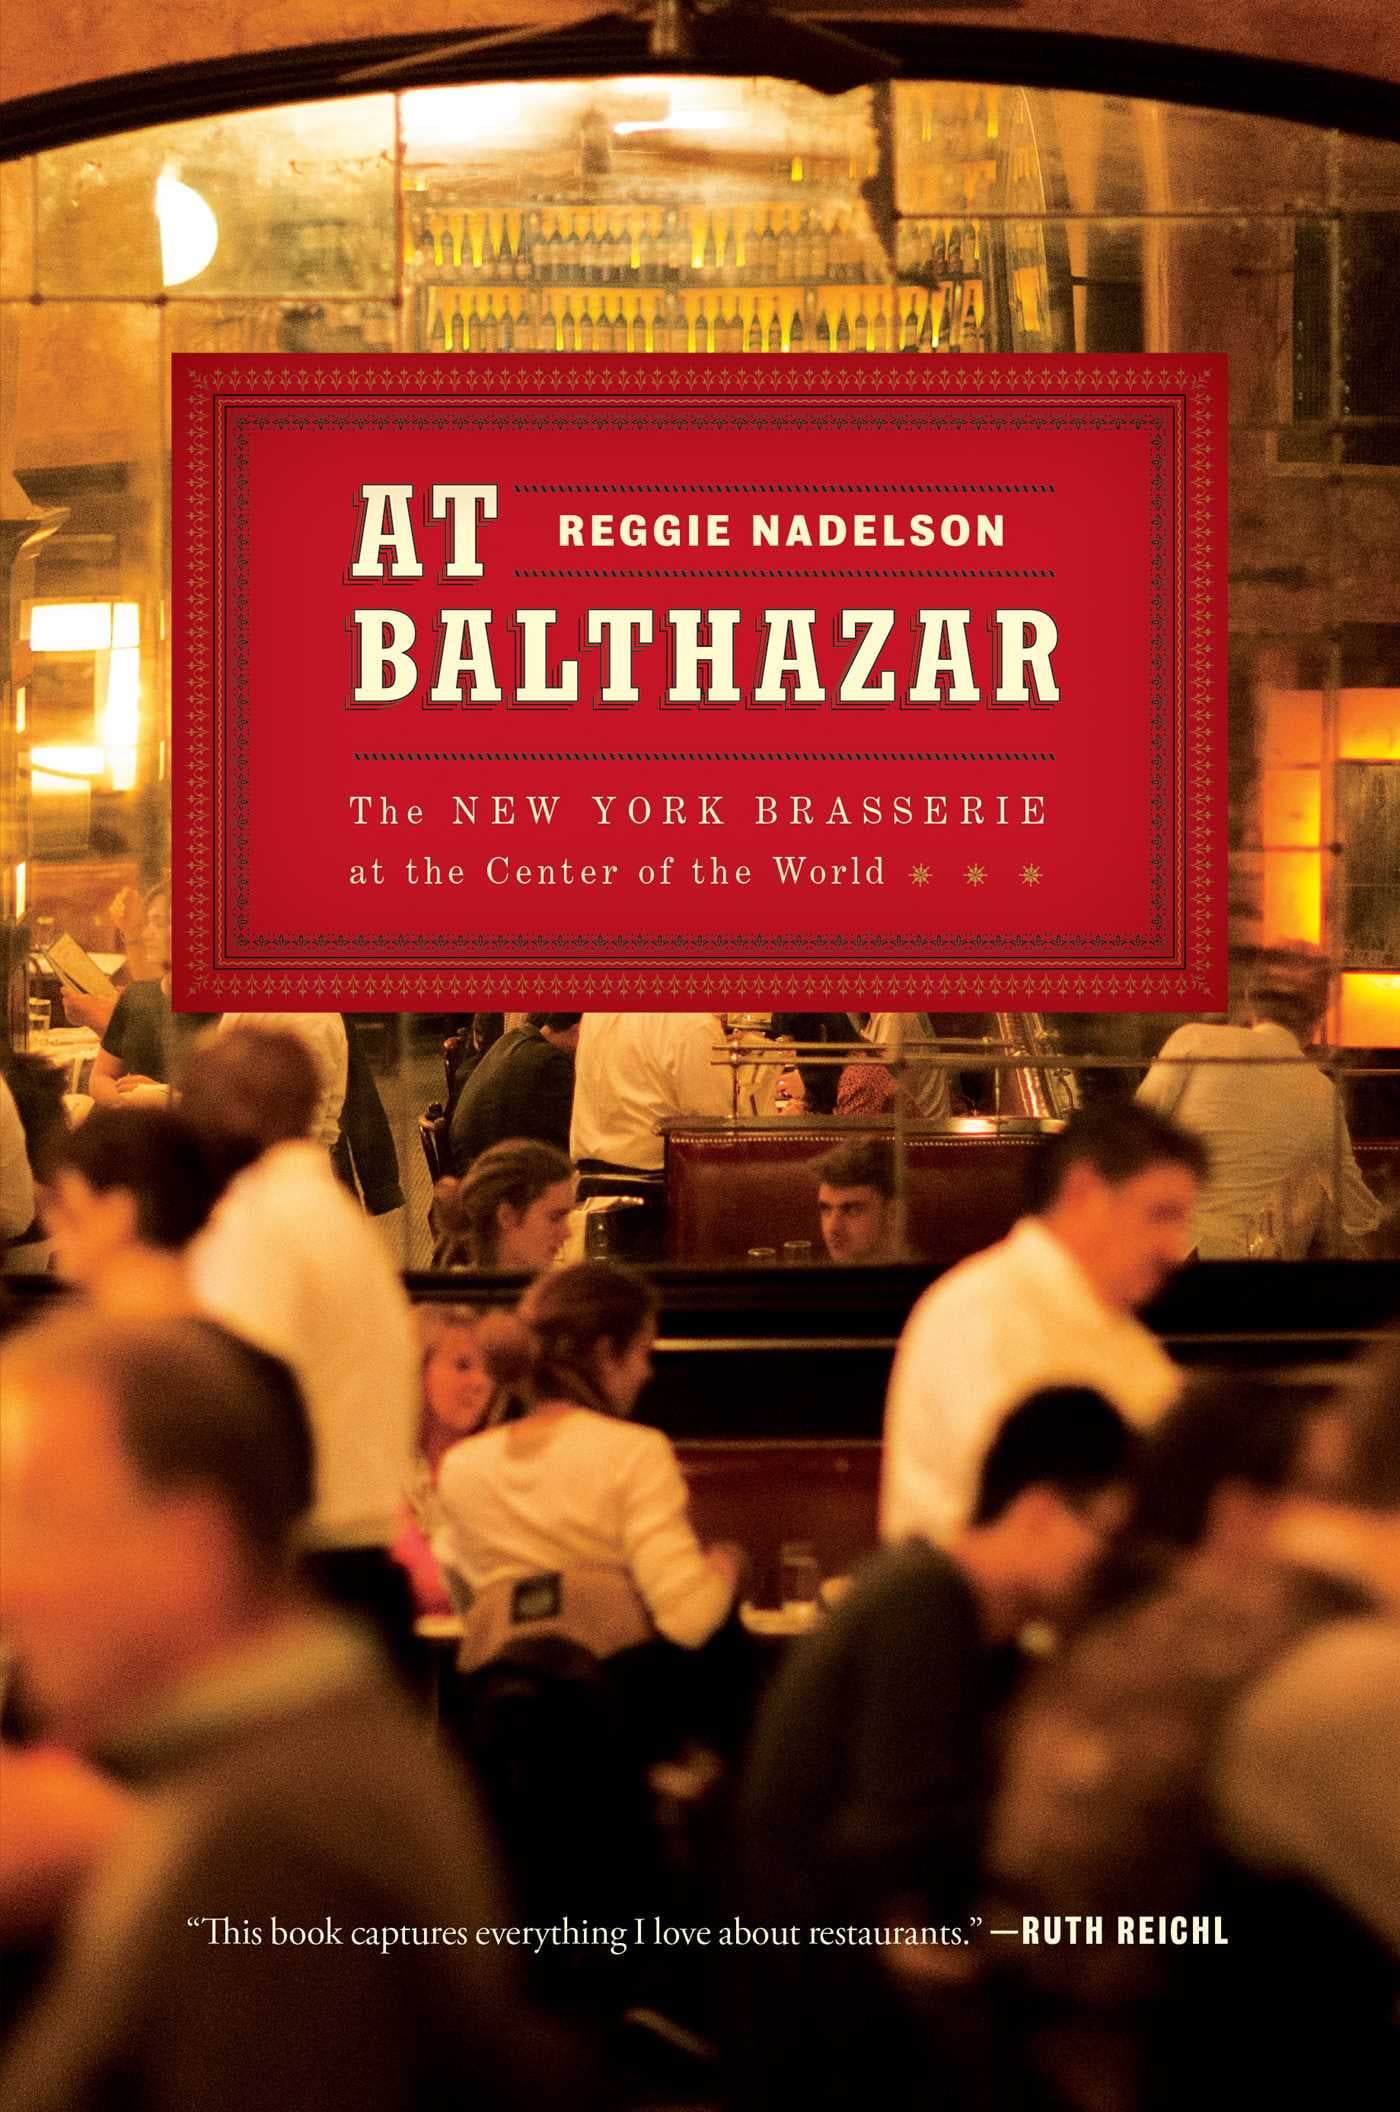 At Balthazar The New York Brasserie at the Center of the World
Epub-Ebook